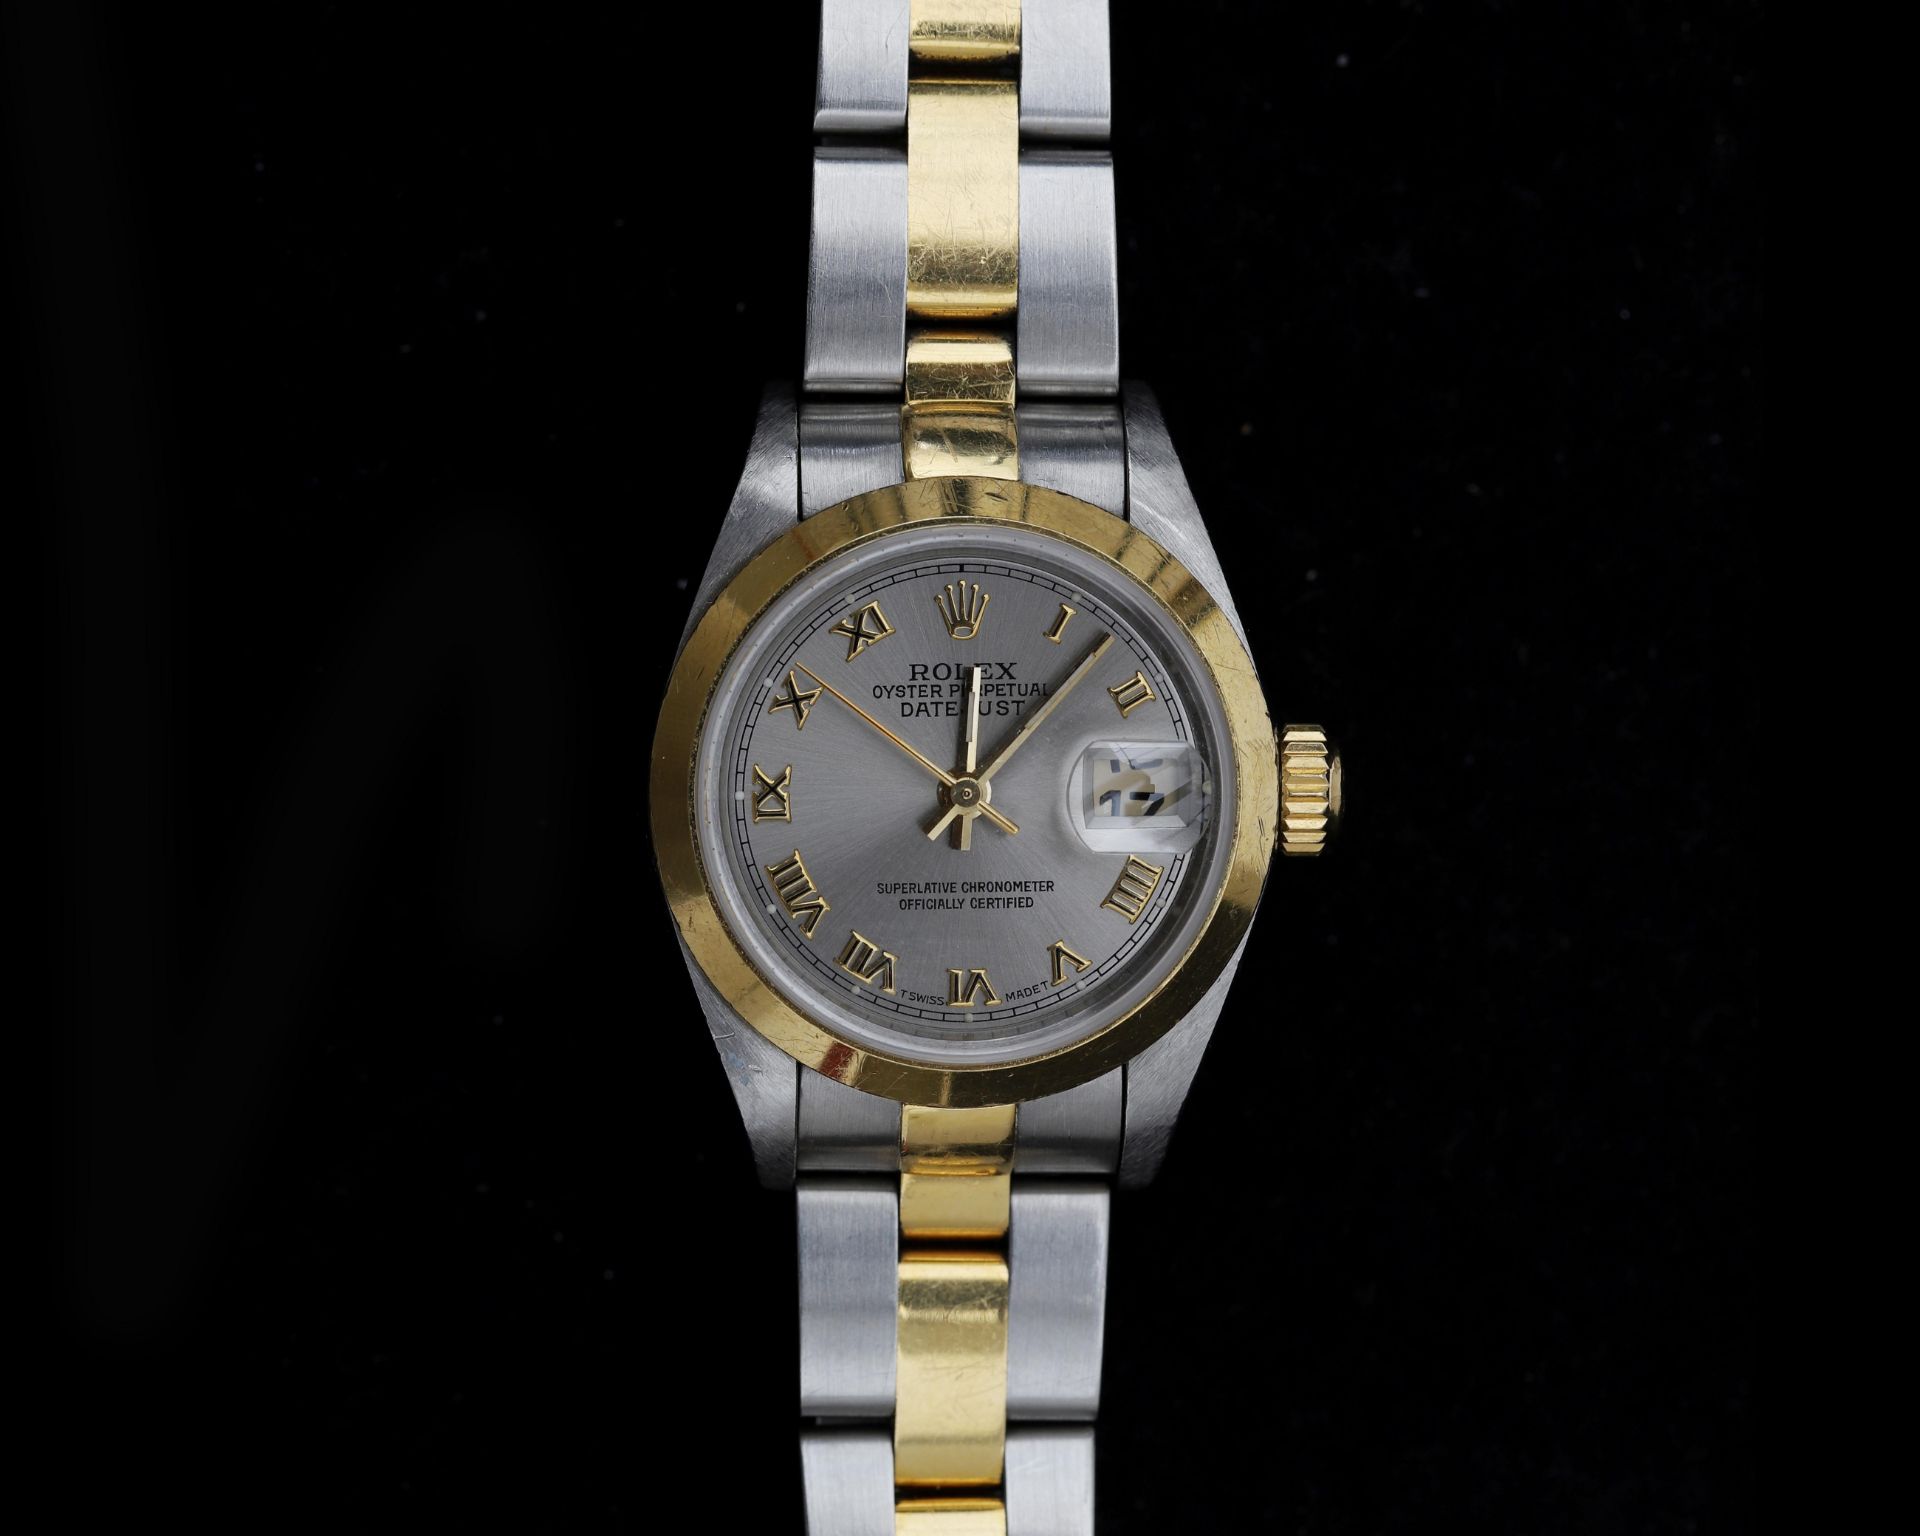 A bi-color Rolex oyster perpetual Lady-Datejust.